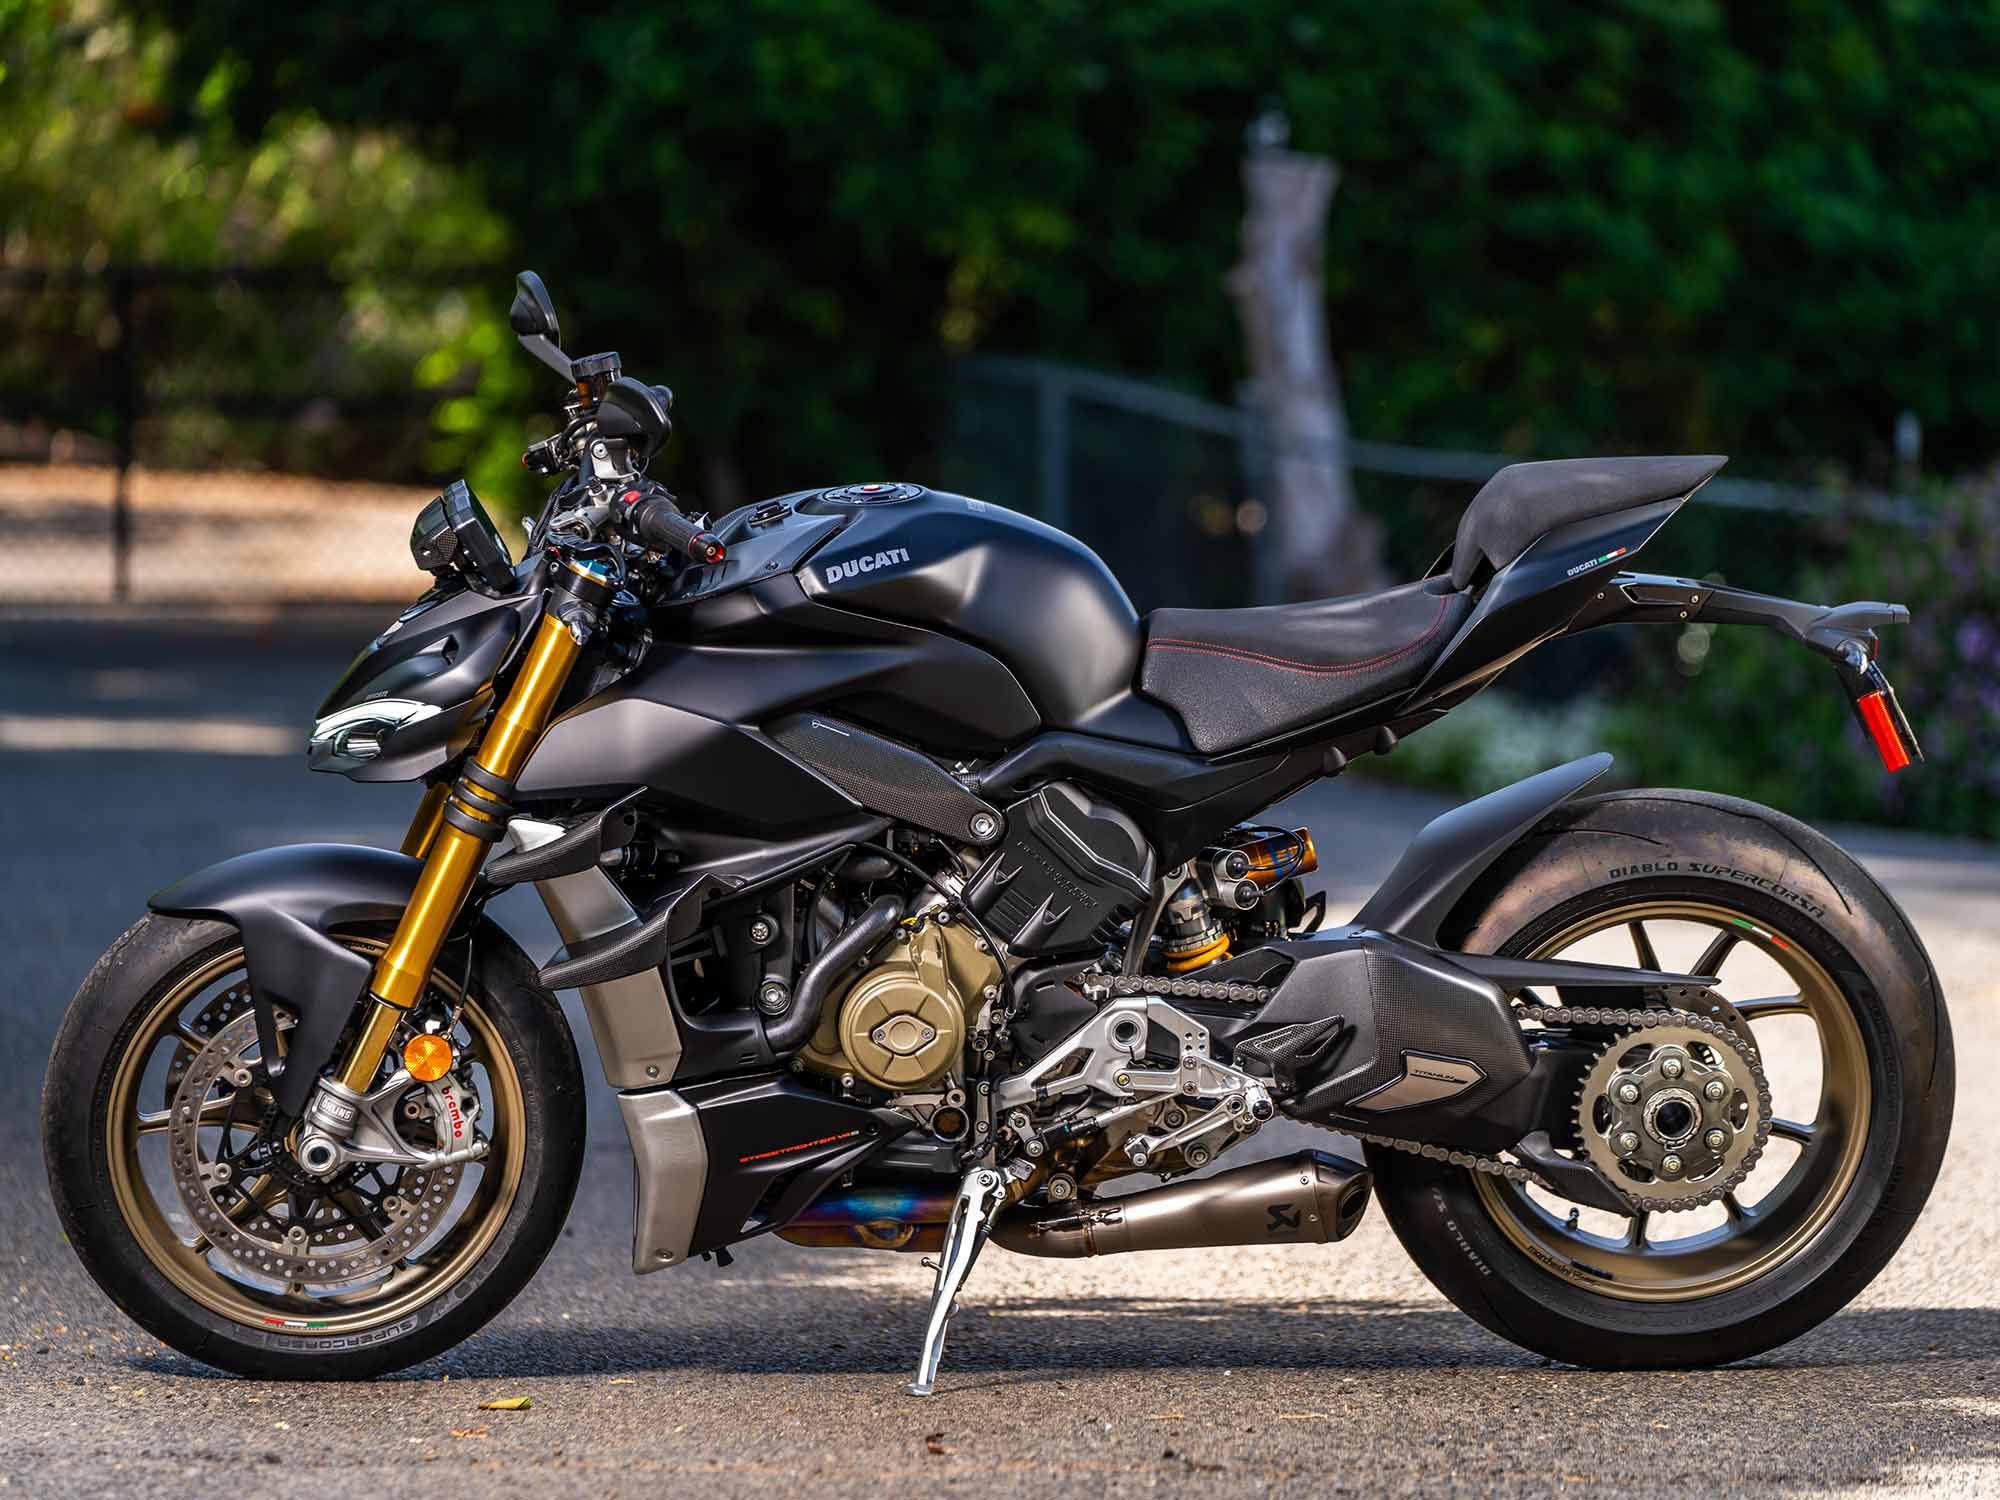 Price aside, the 2021 Ducati Streetfigther V4 S is a big deal. If you’re looking for the utmost in road-going naked bike performance, this vehicle is it.